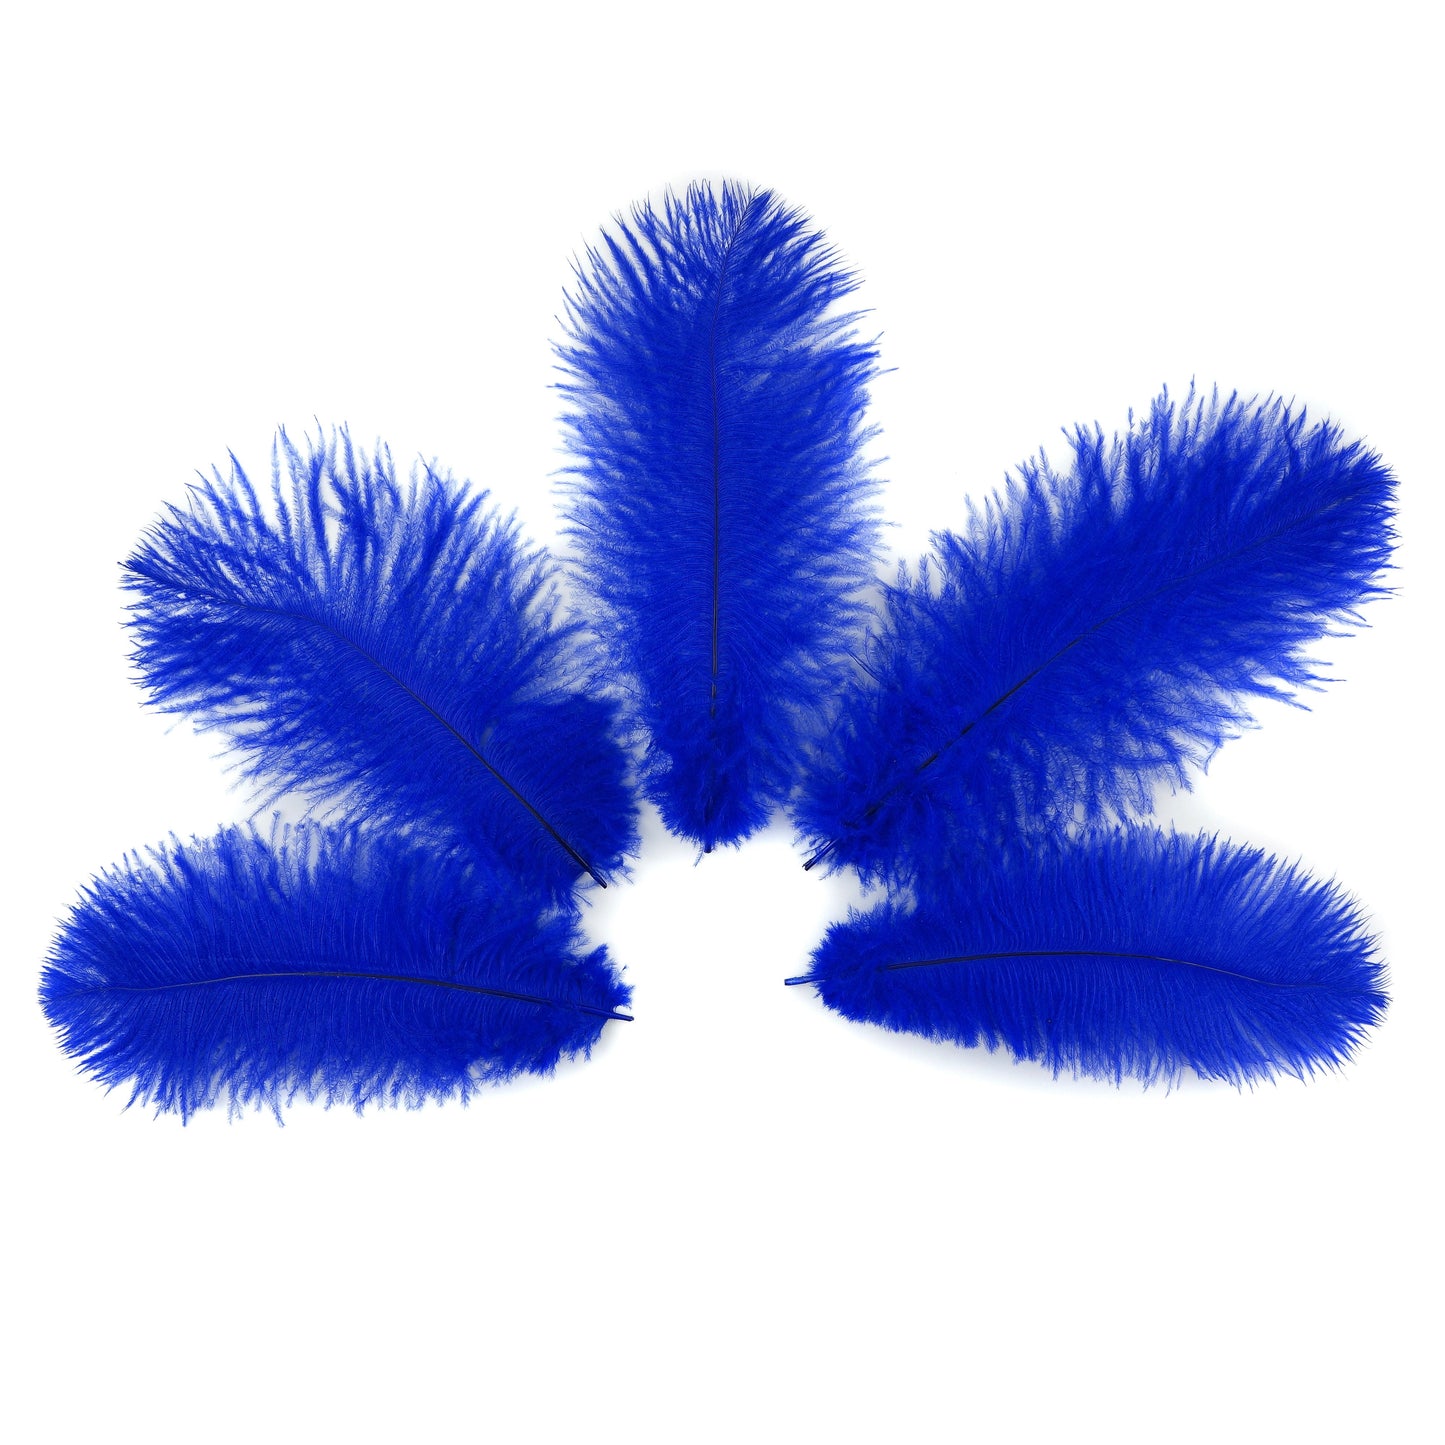 Ostrich Feathers 9-12" Drabs - Royal